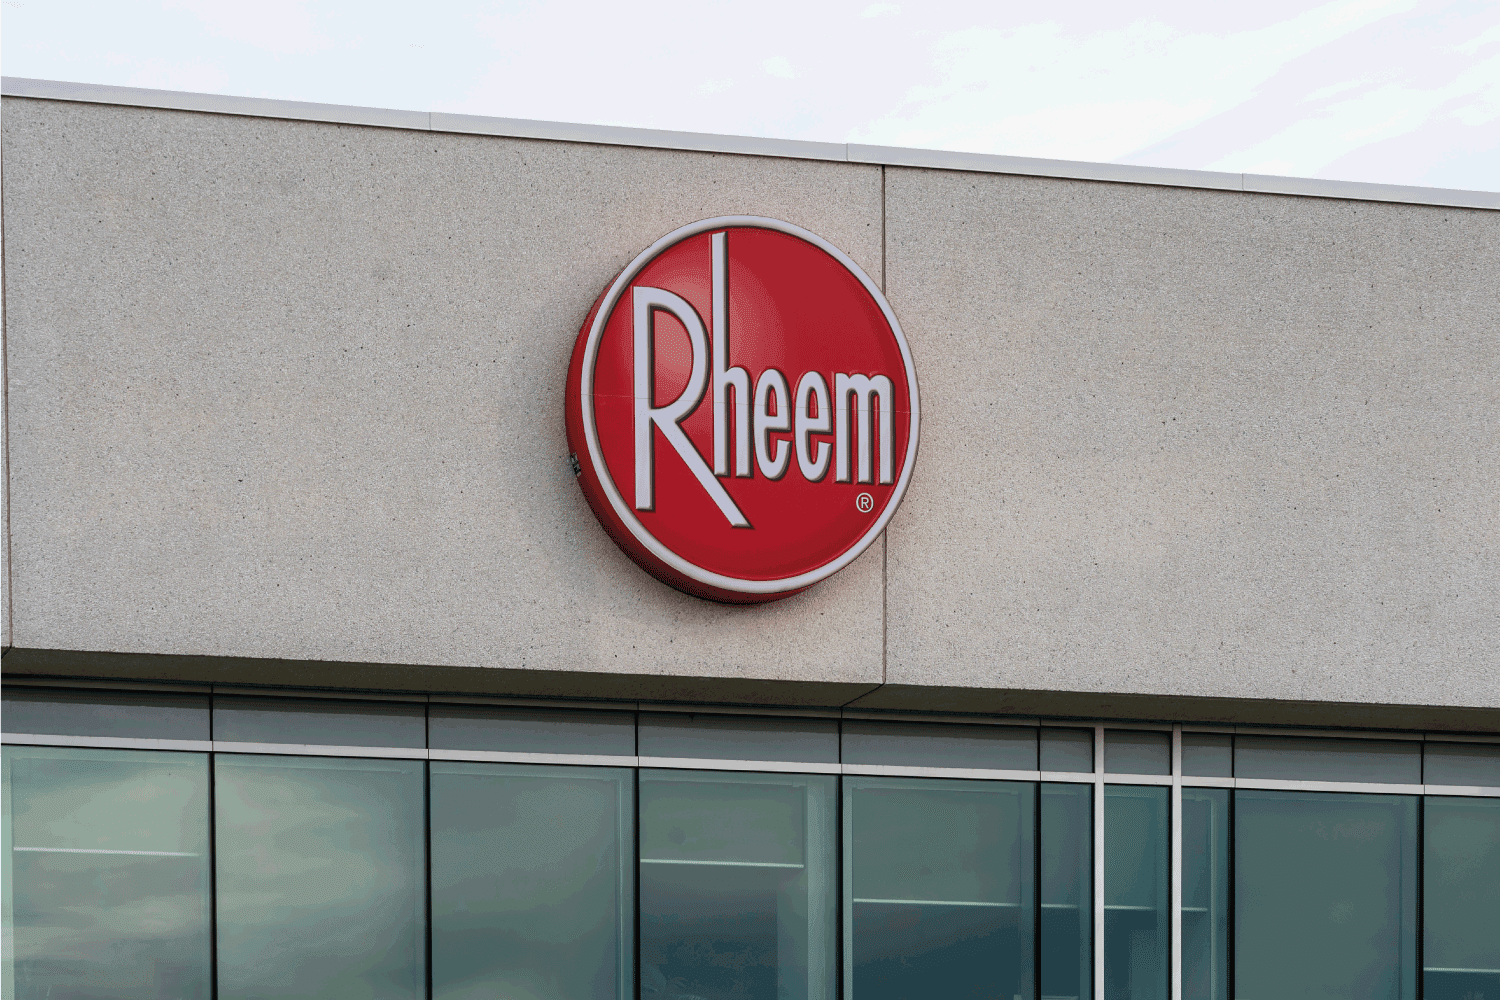 Rheem an American manufacturer that produces water heaters, boilers, HVAC equipment.